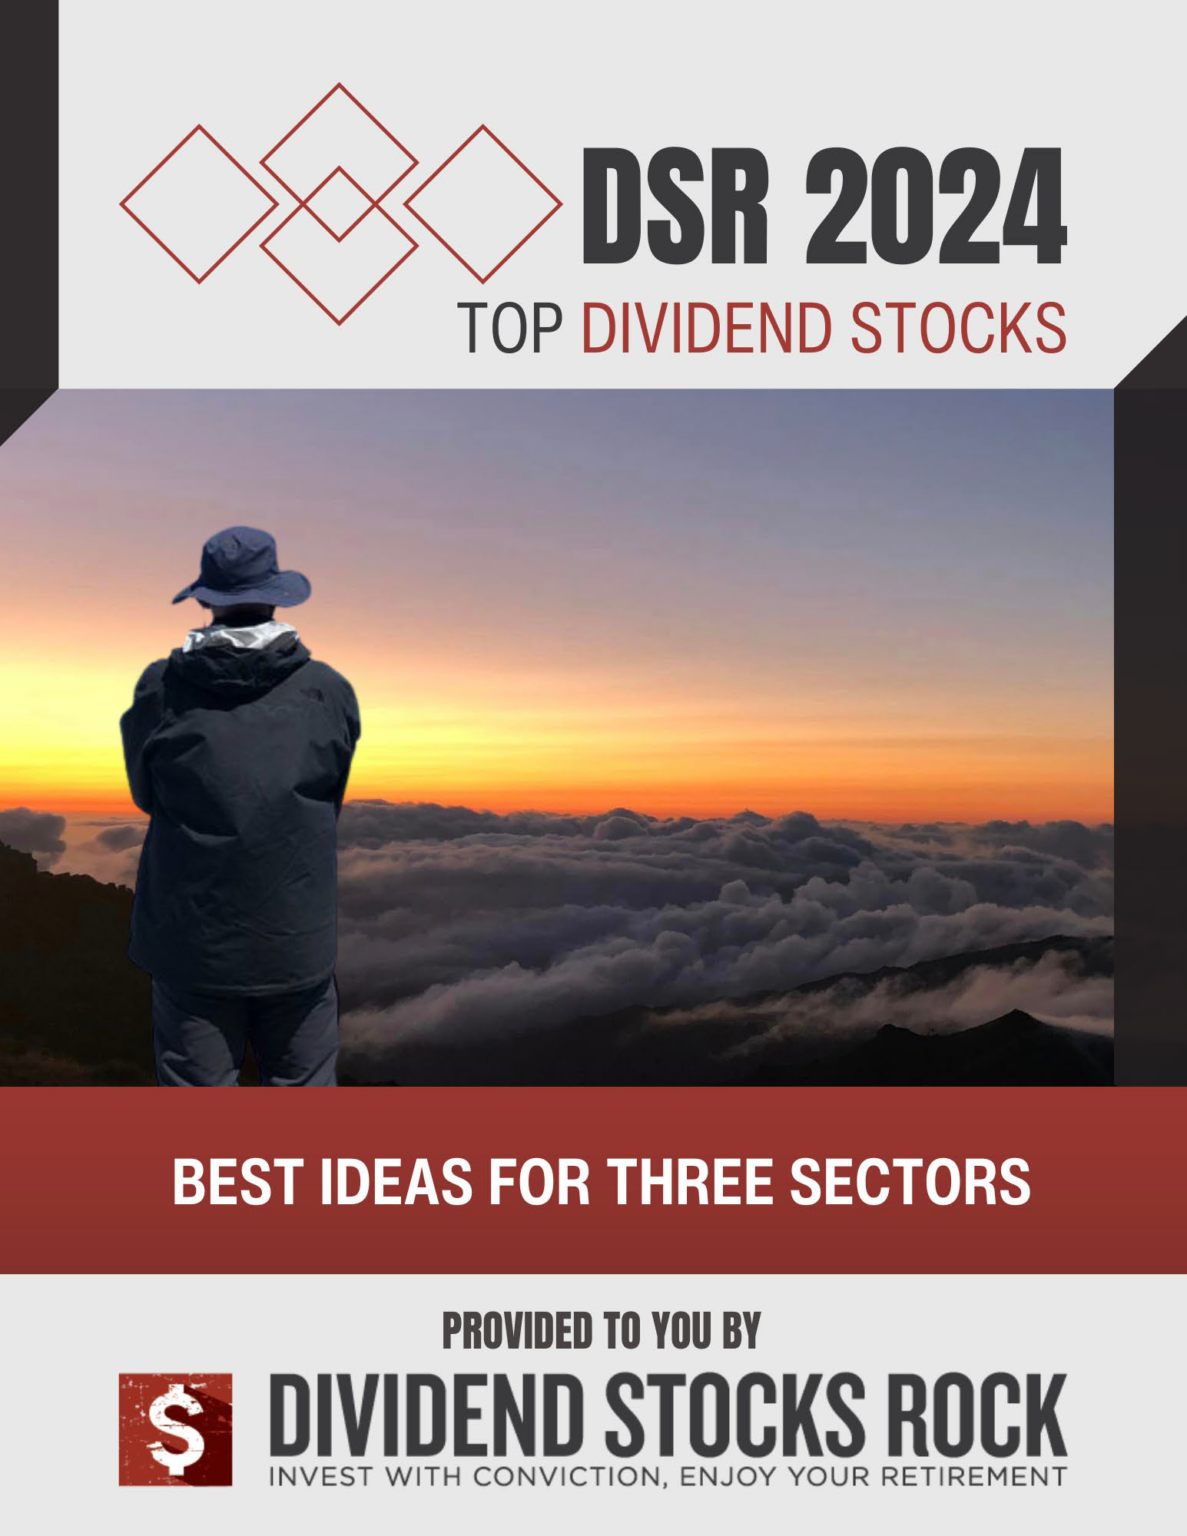 Top Dividend Stocks For 2024